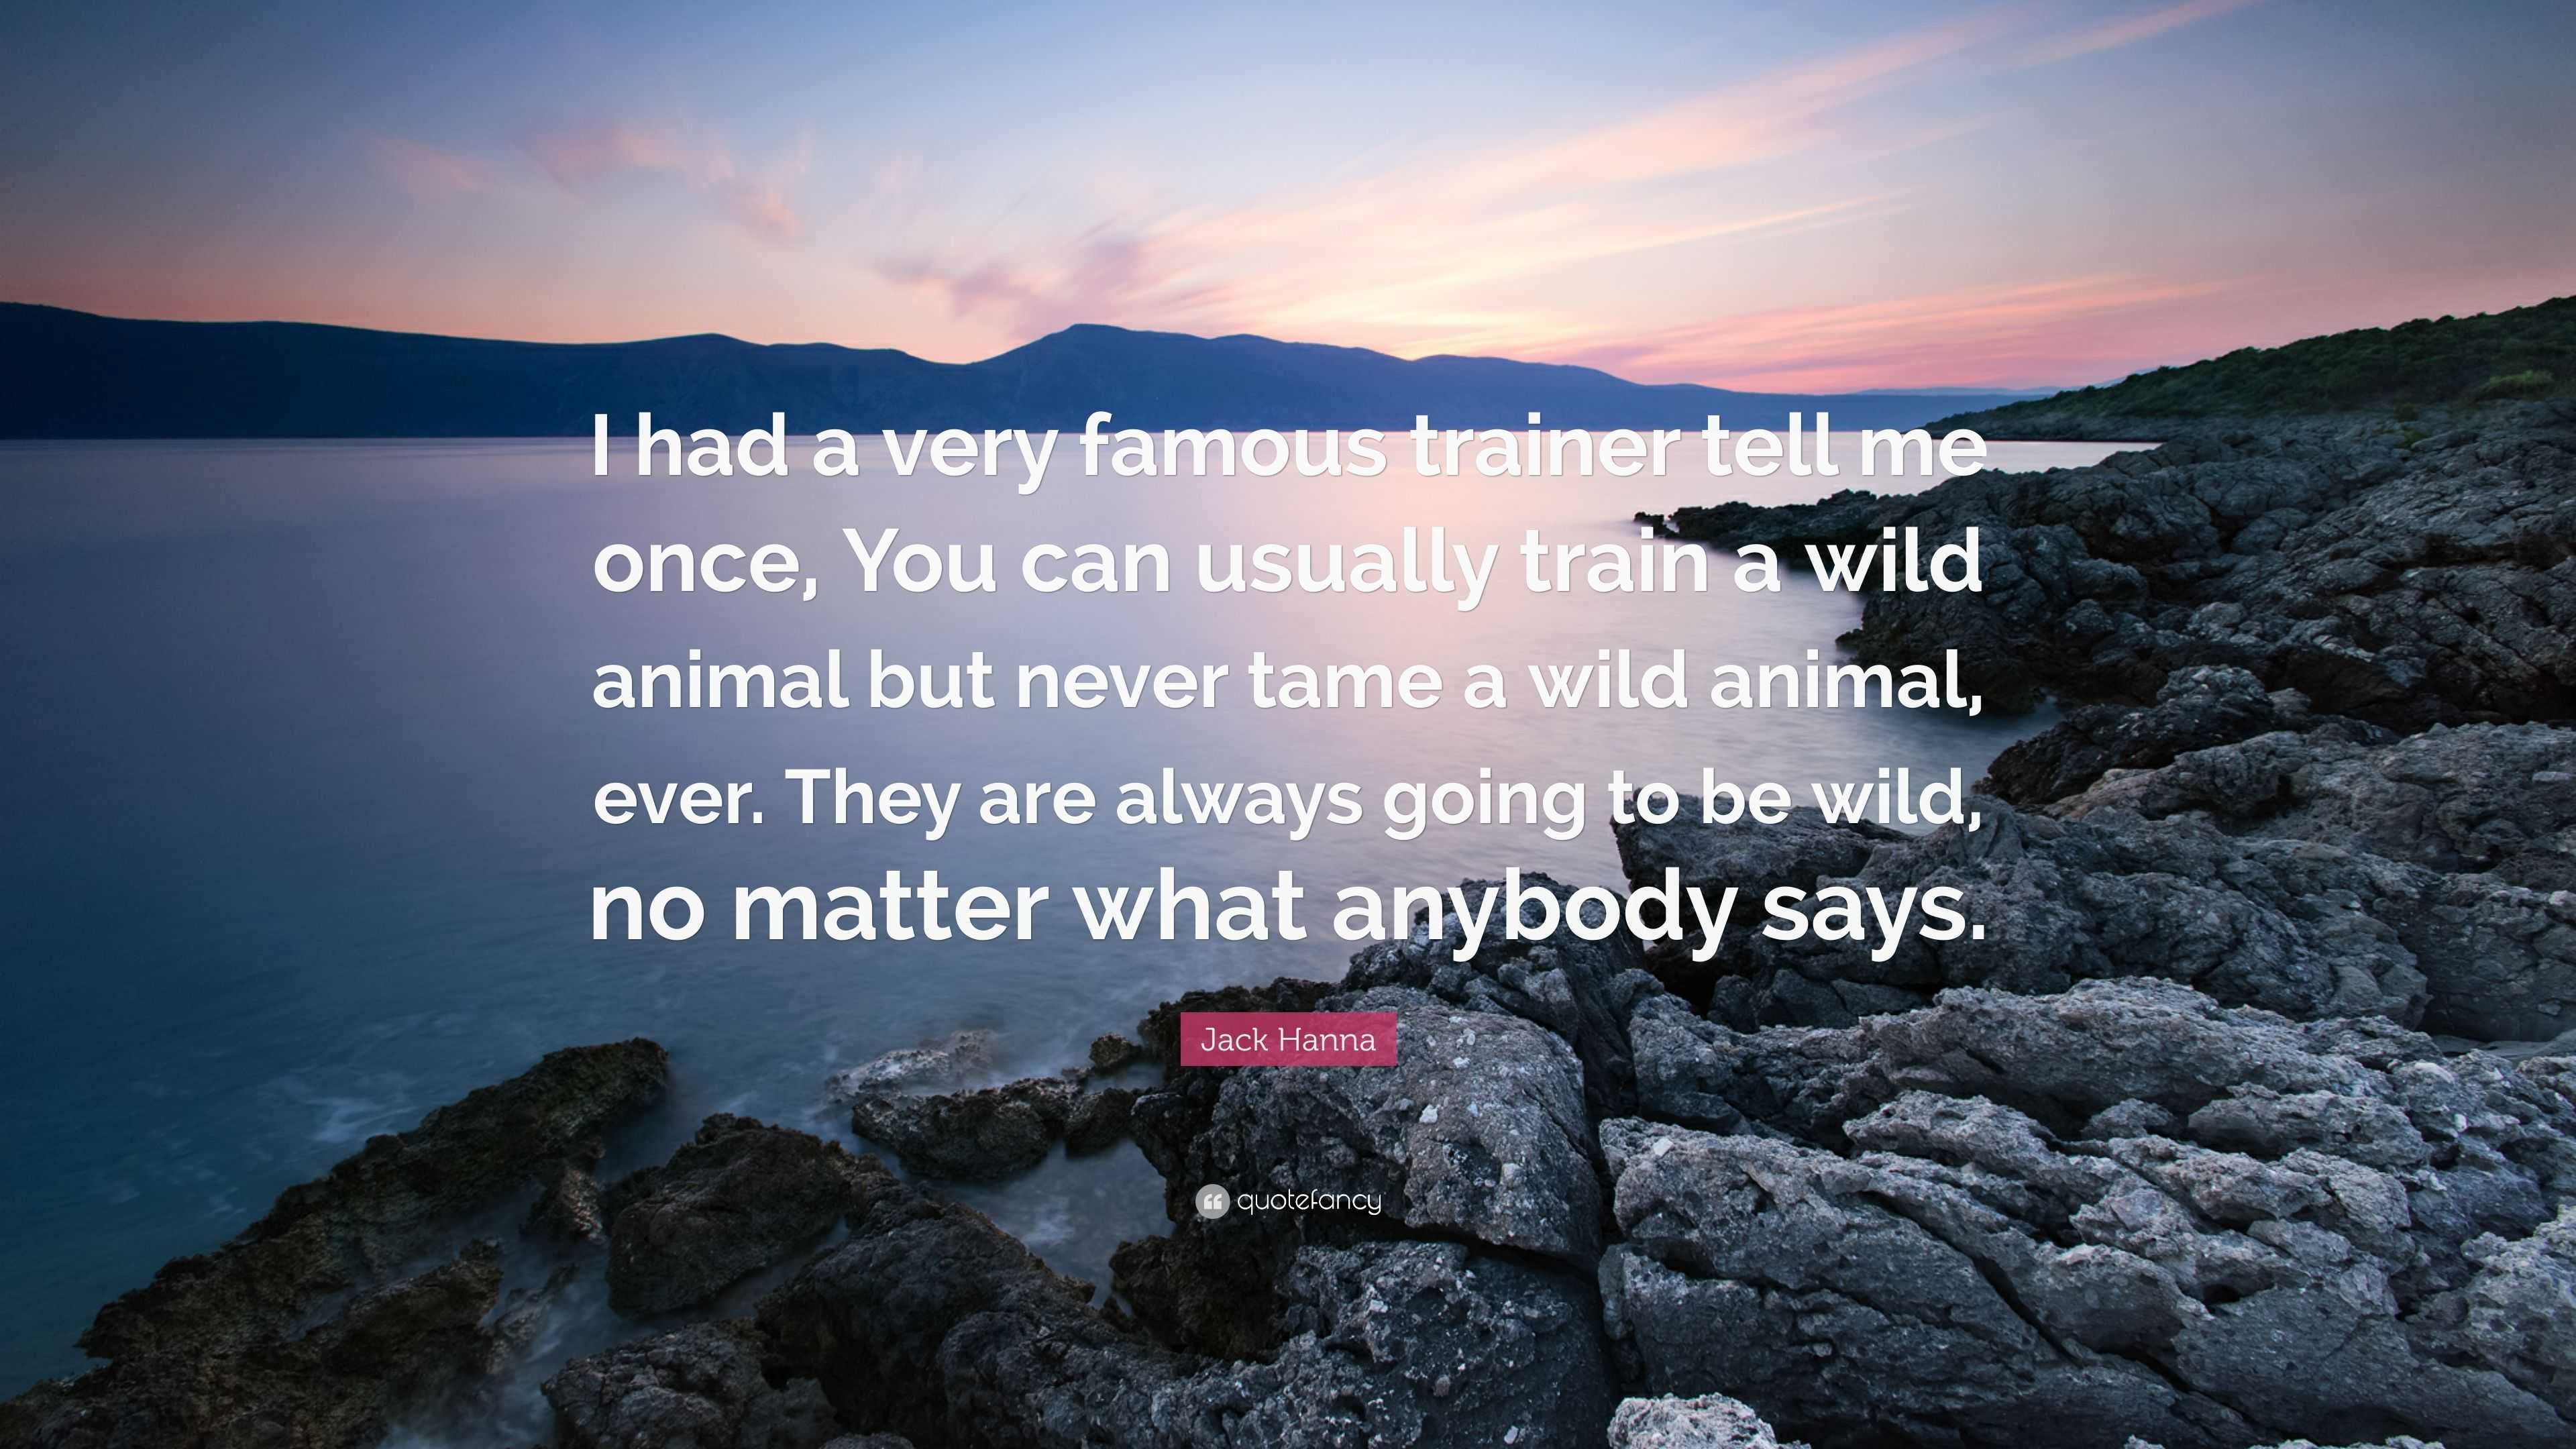 Jack Hanna Quote: “I had a very famous trainer tell me once, You can  usually train a wild animal but never tame a wild animal, ever. They a...”